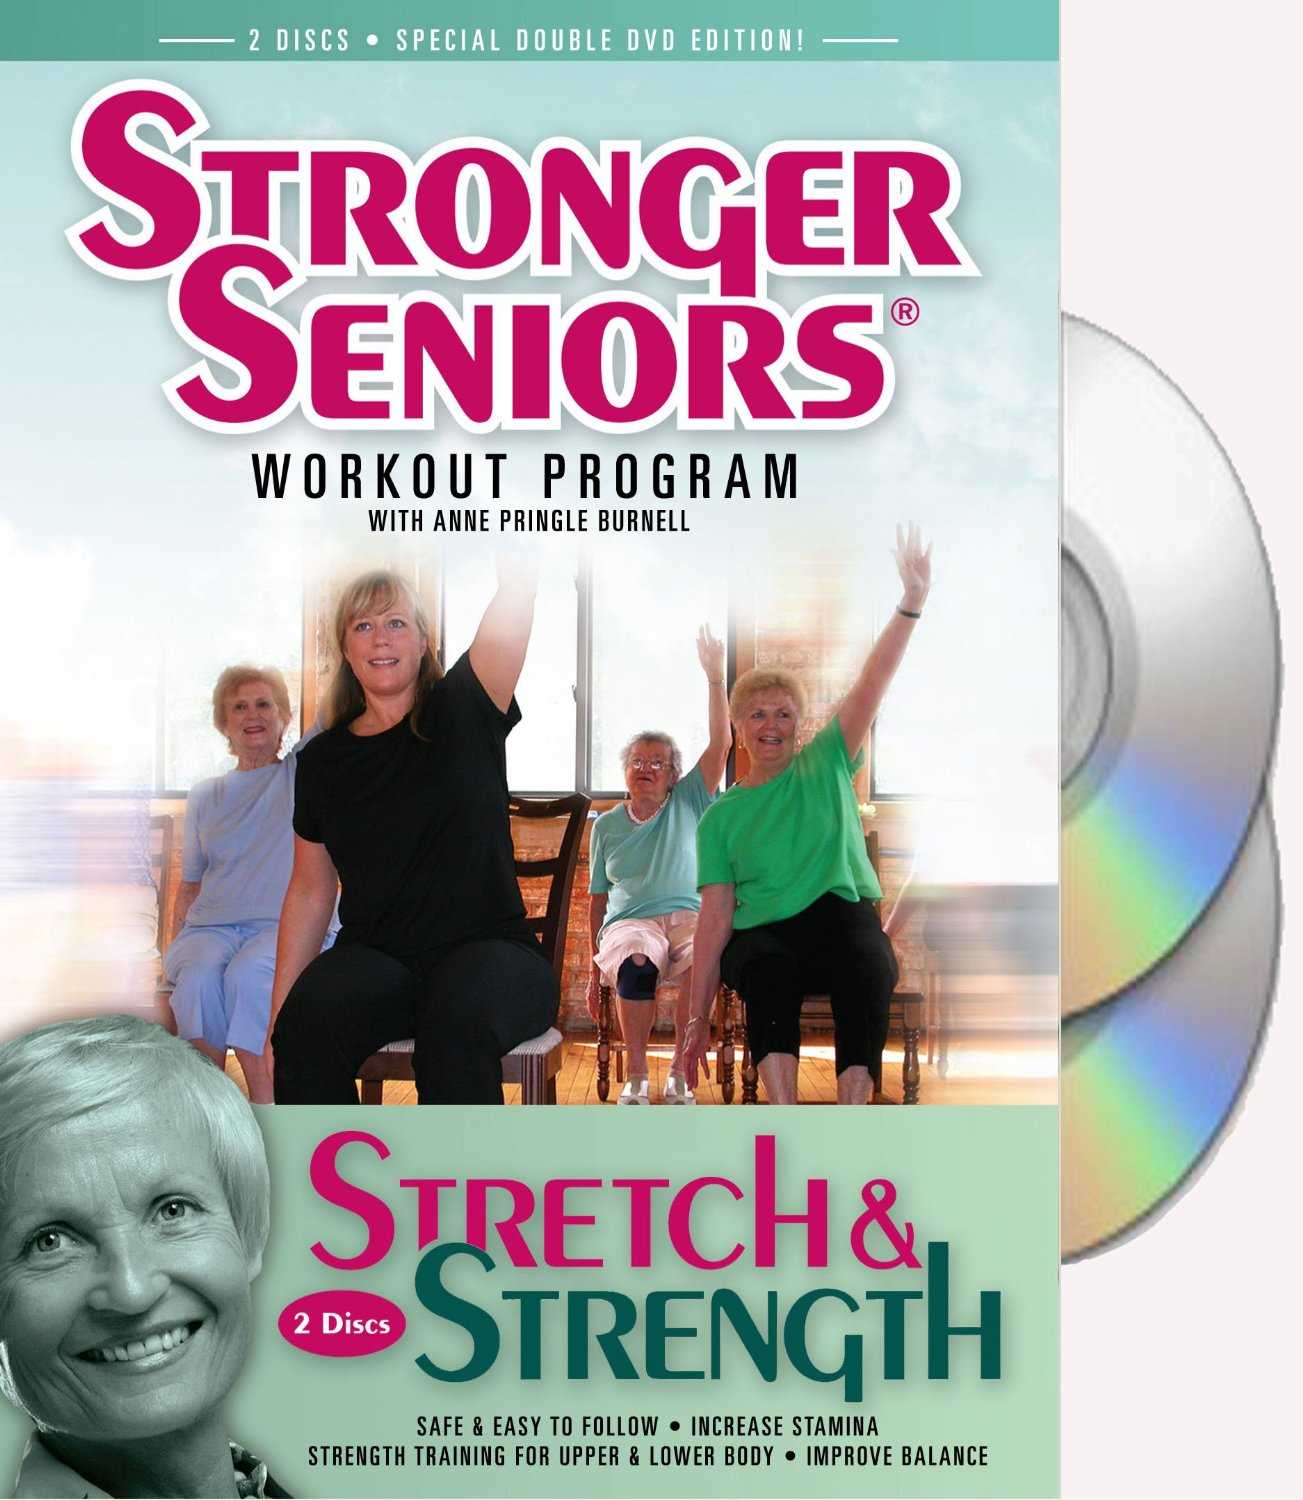 Senior Dance and Exercise Videos, DVDs and Books